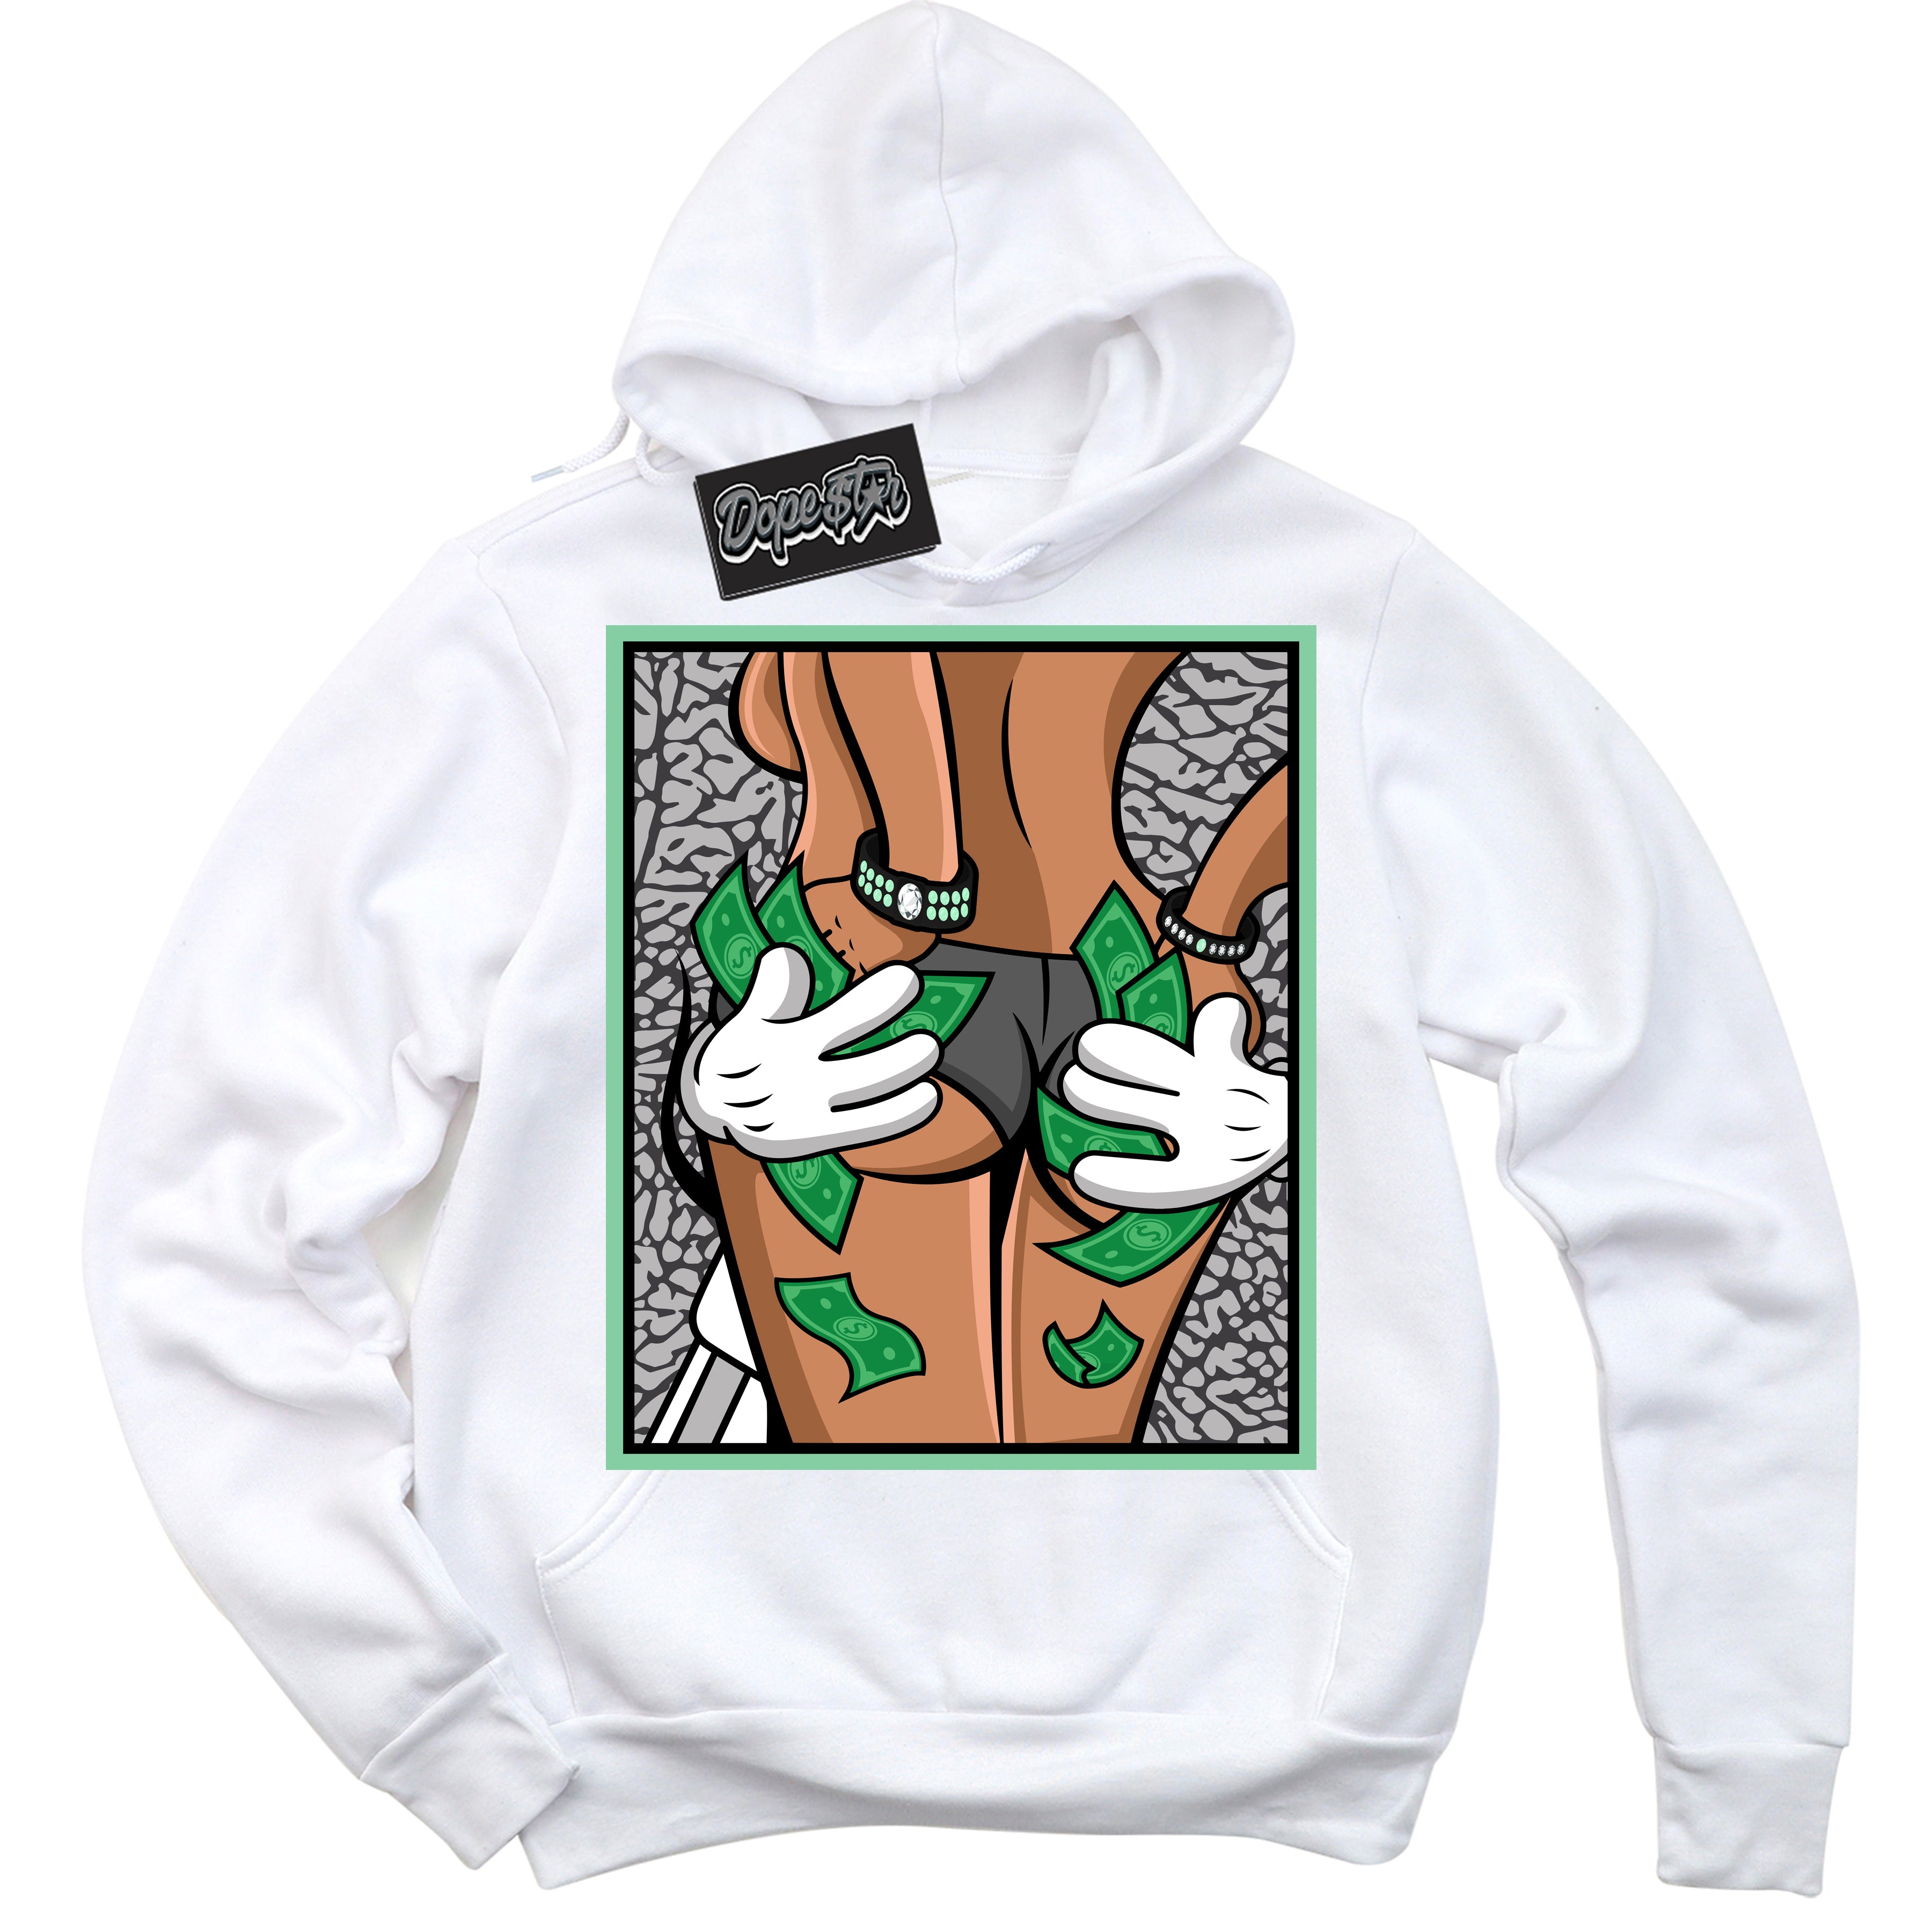 Cool White Graphic DopeStar Hoodie with “ Money Hands “ print, that perfectly matches Green Glow 3s sneakers